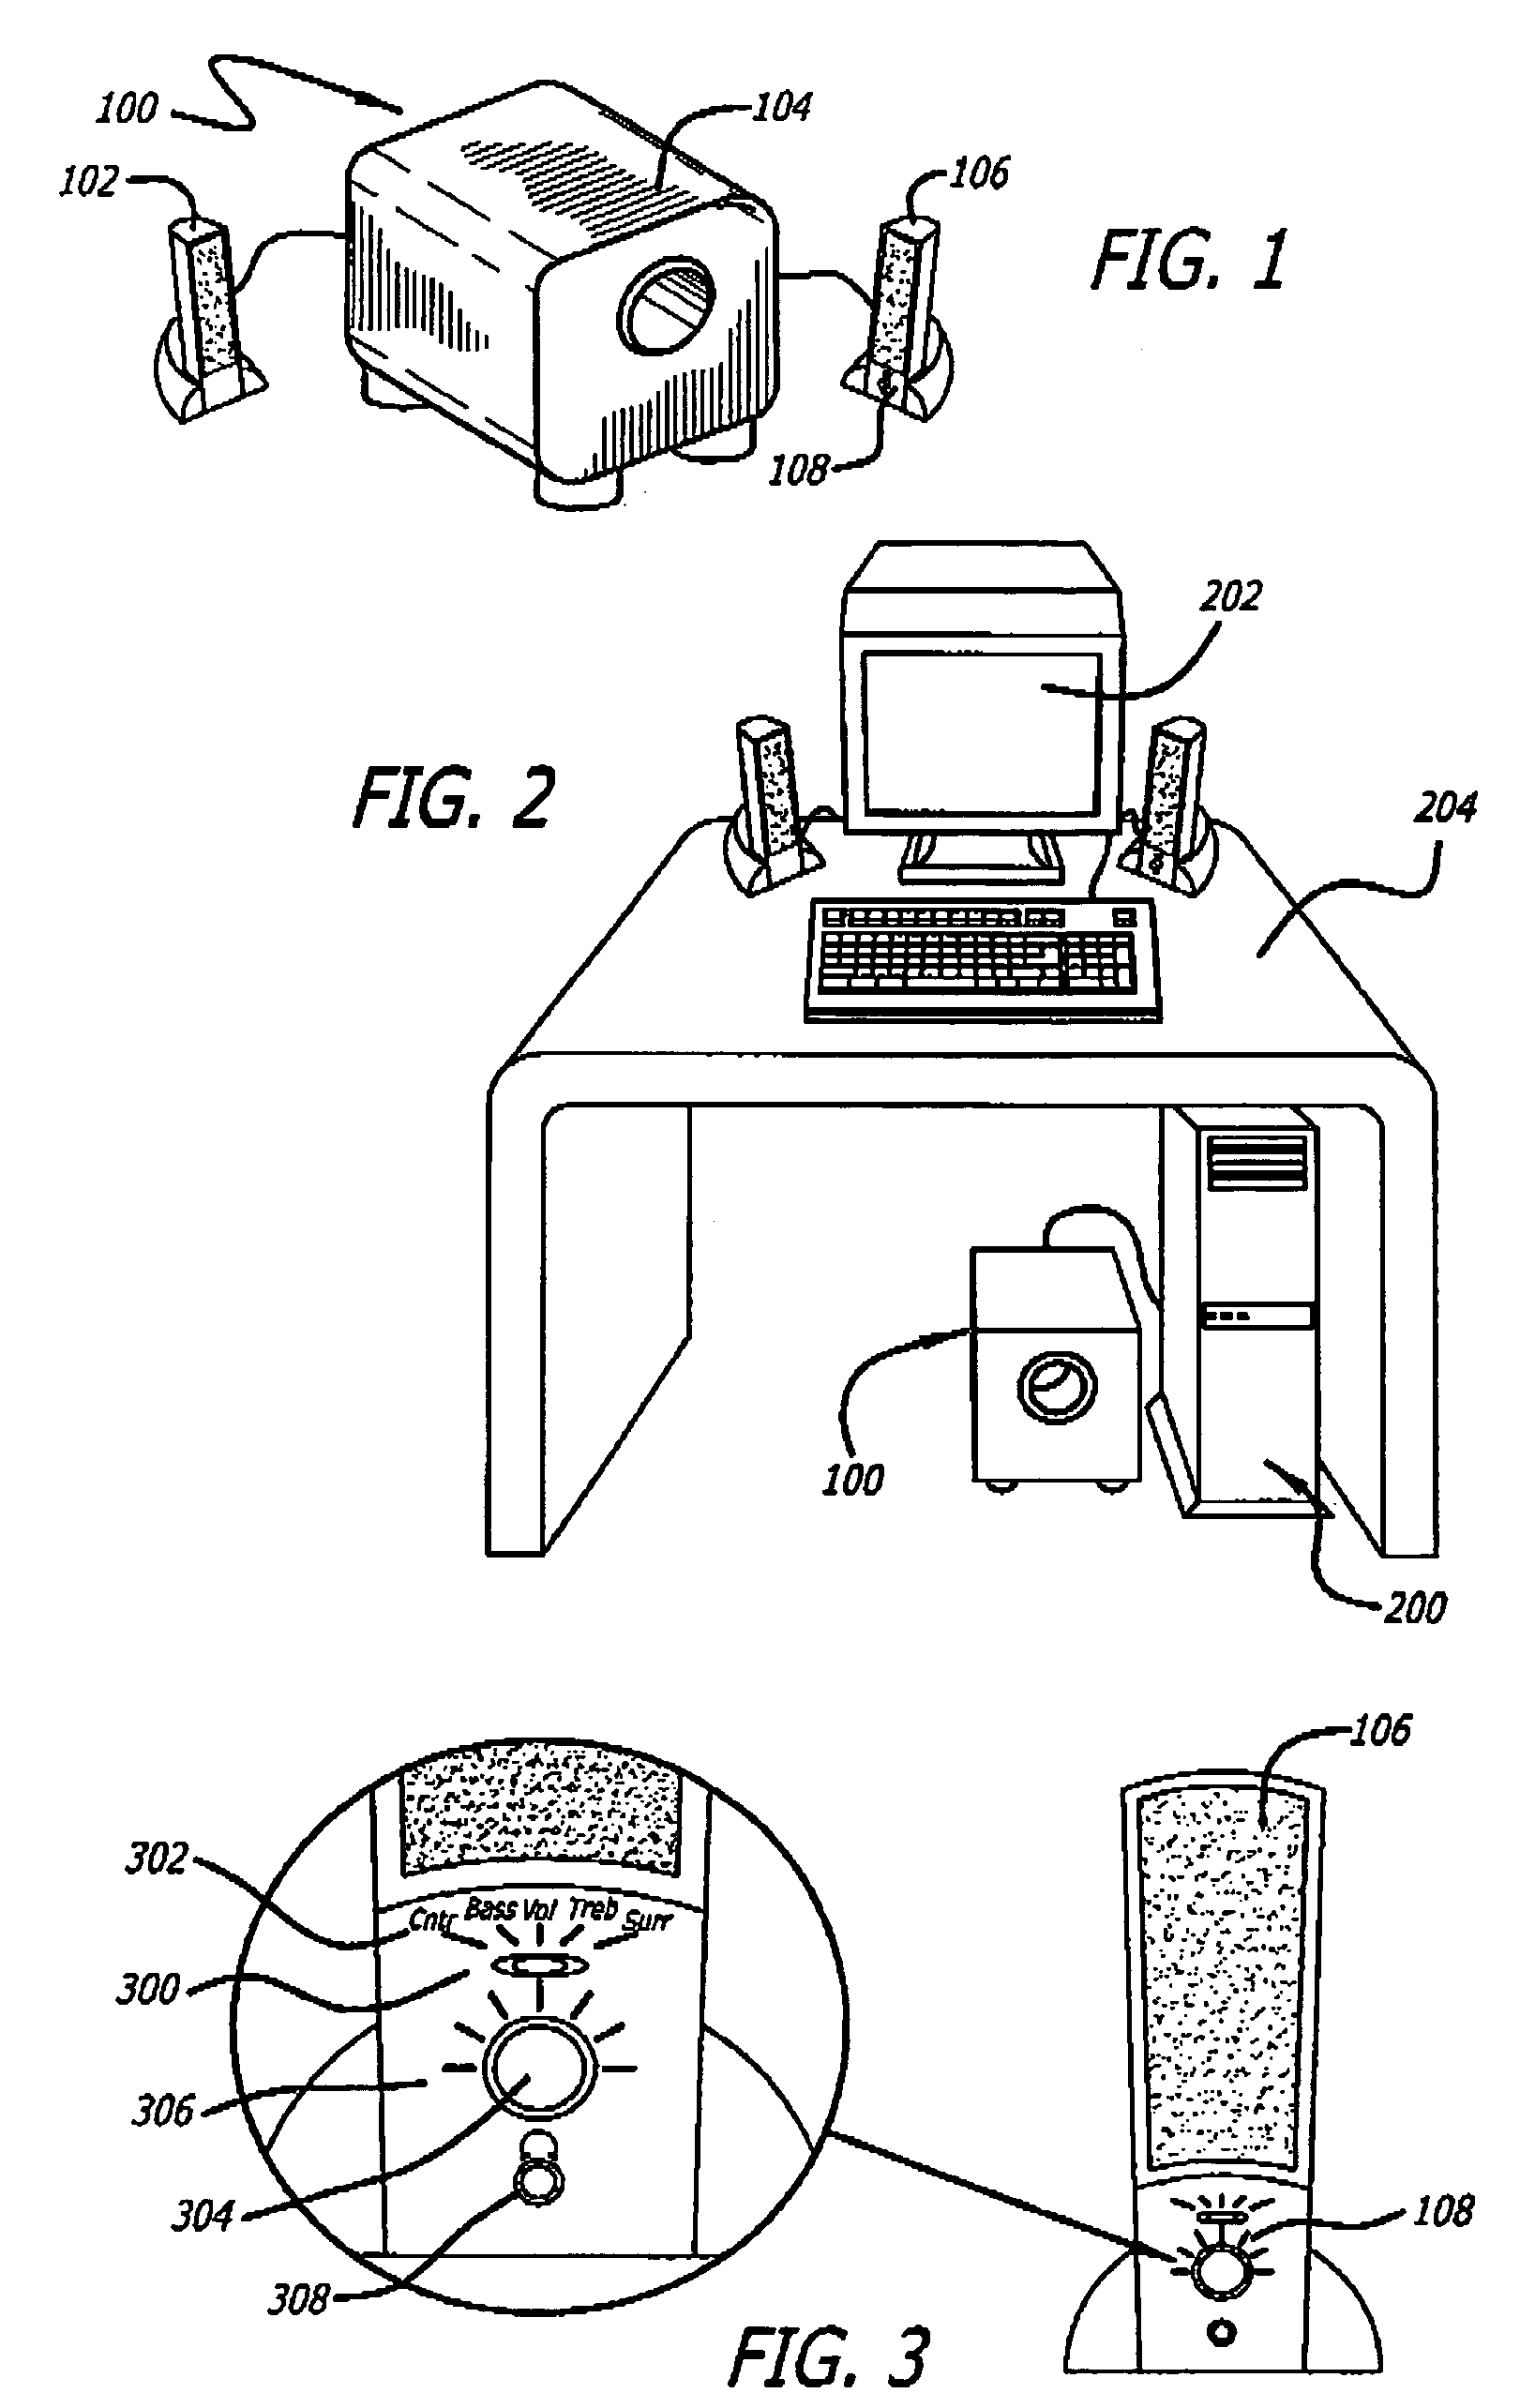 Audio system for minimizing the chance that high power audio signals may be directed to a headphone jack